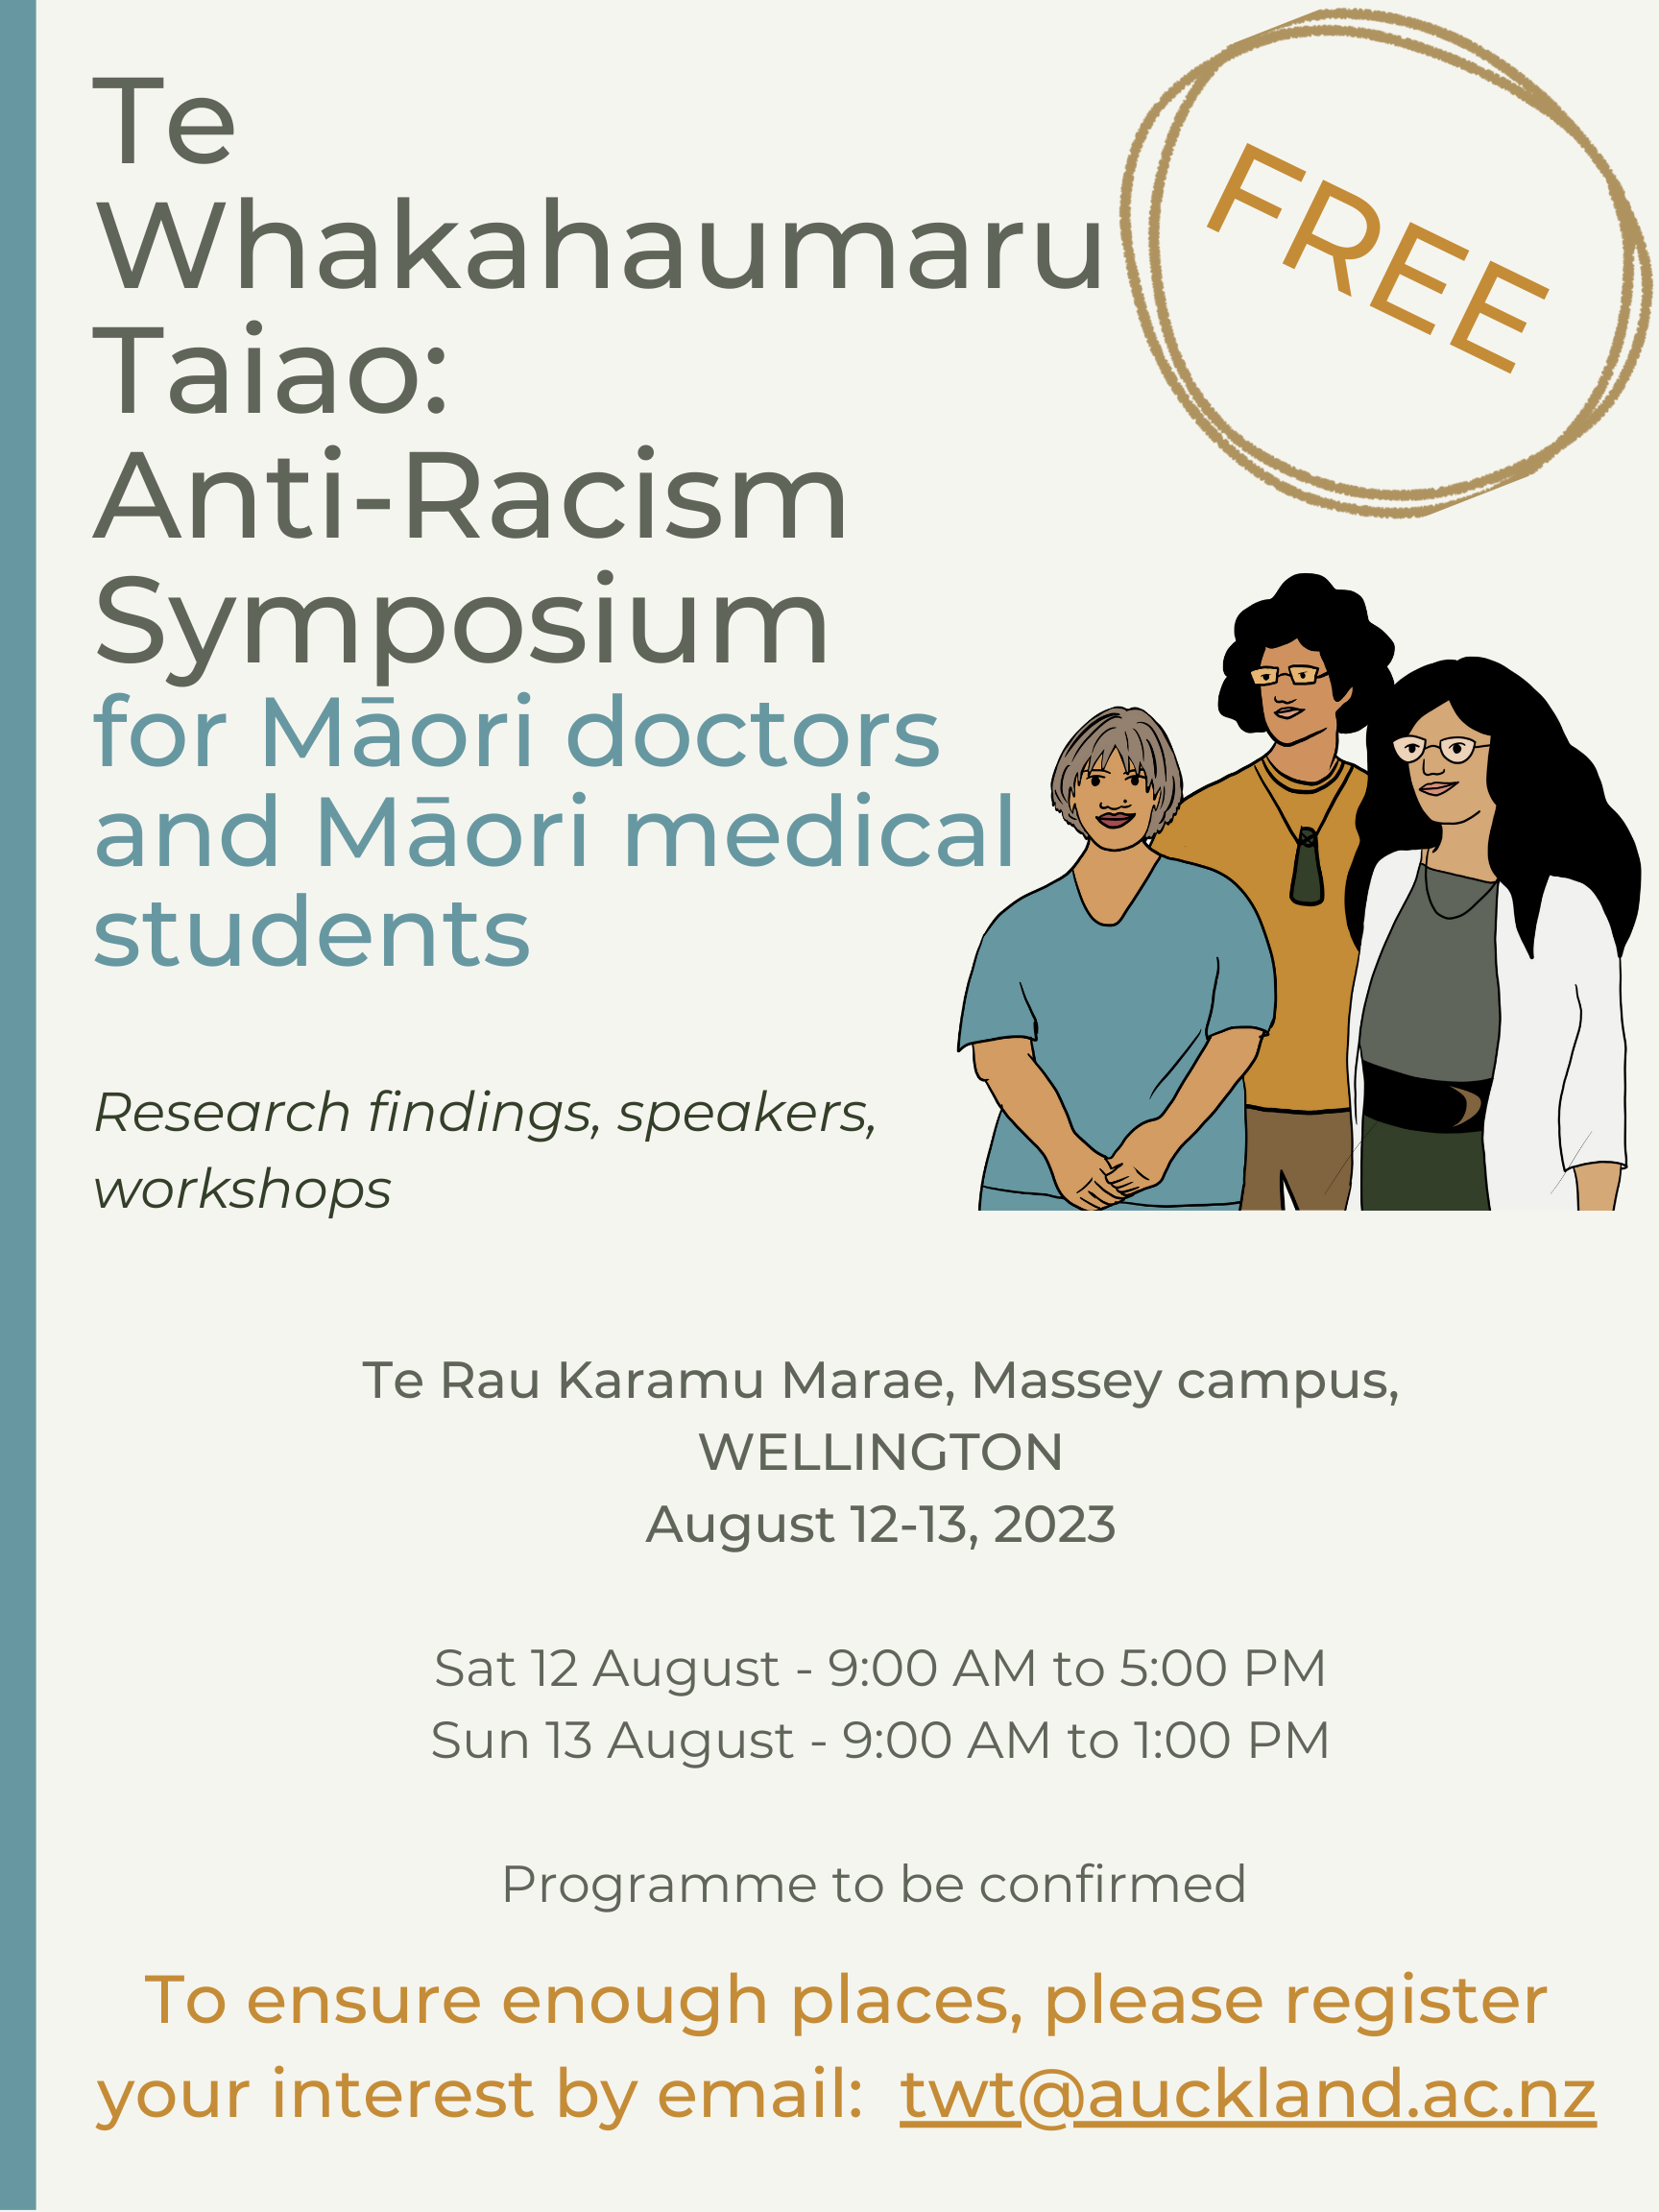 Poster asking Māori doctors and Māori medical students to register to attend an anti-racism symposium by emailing twt@auckland.ac.nz